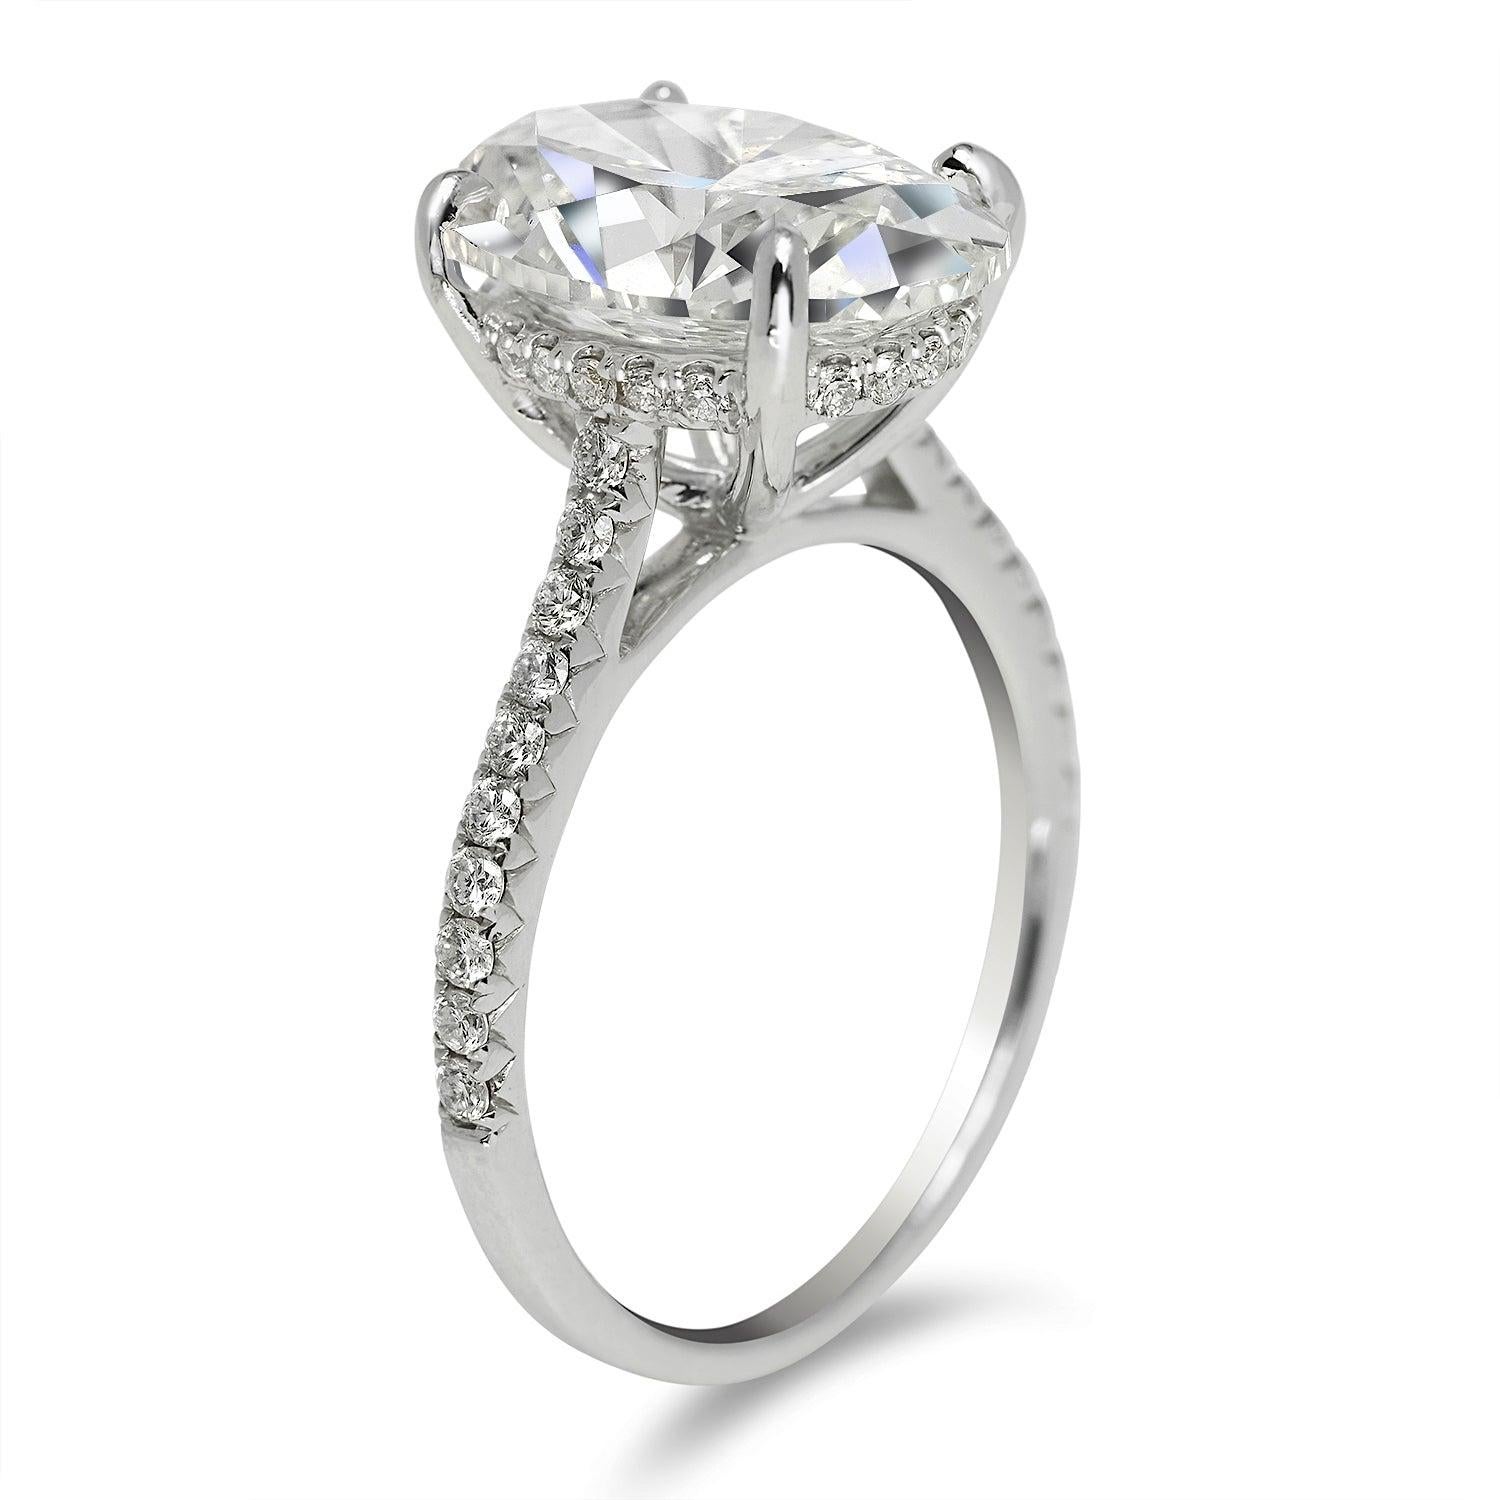 6 carat oval engagement ring